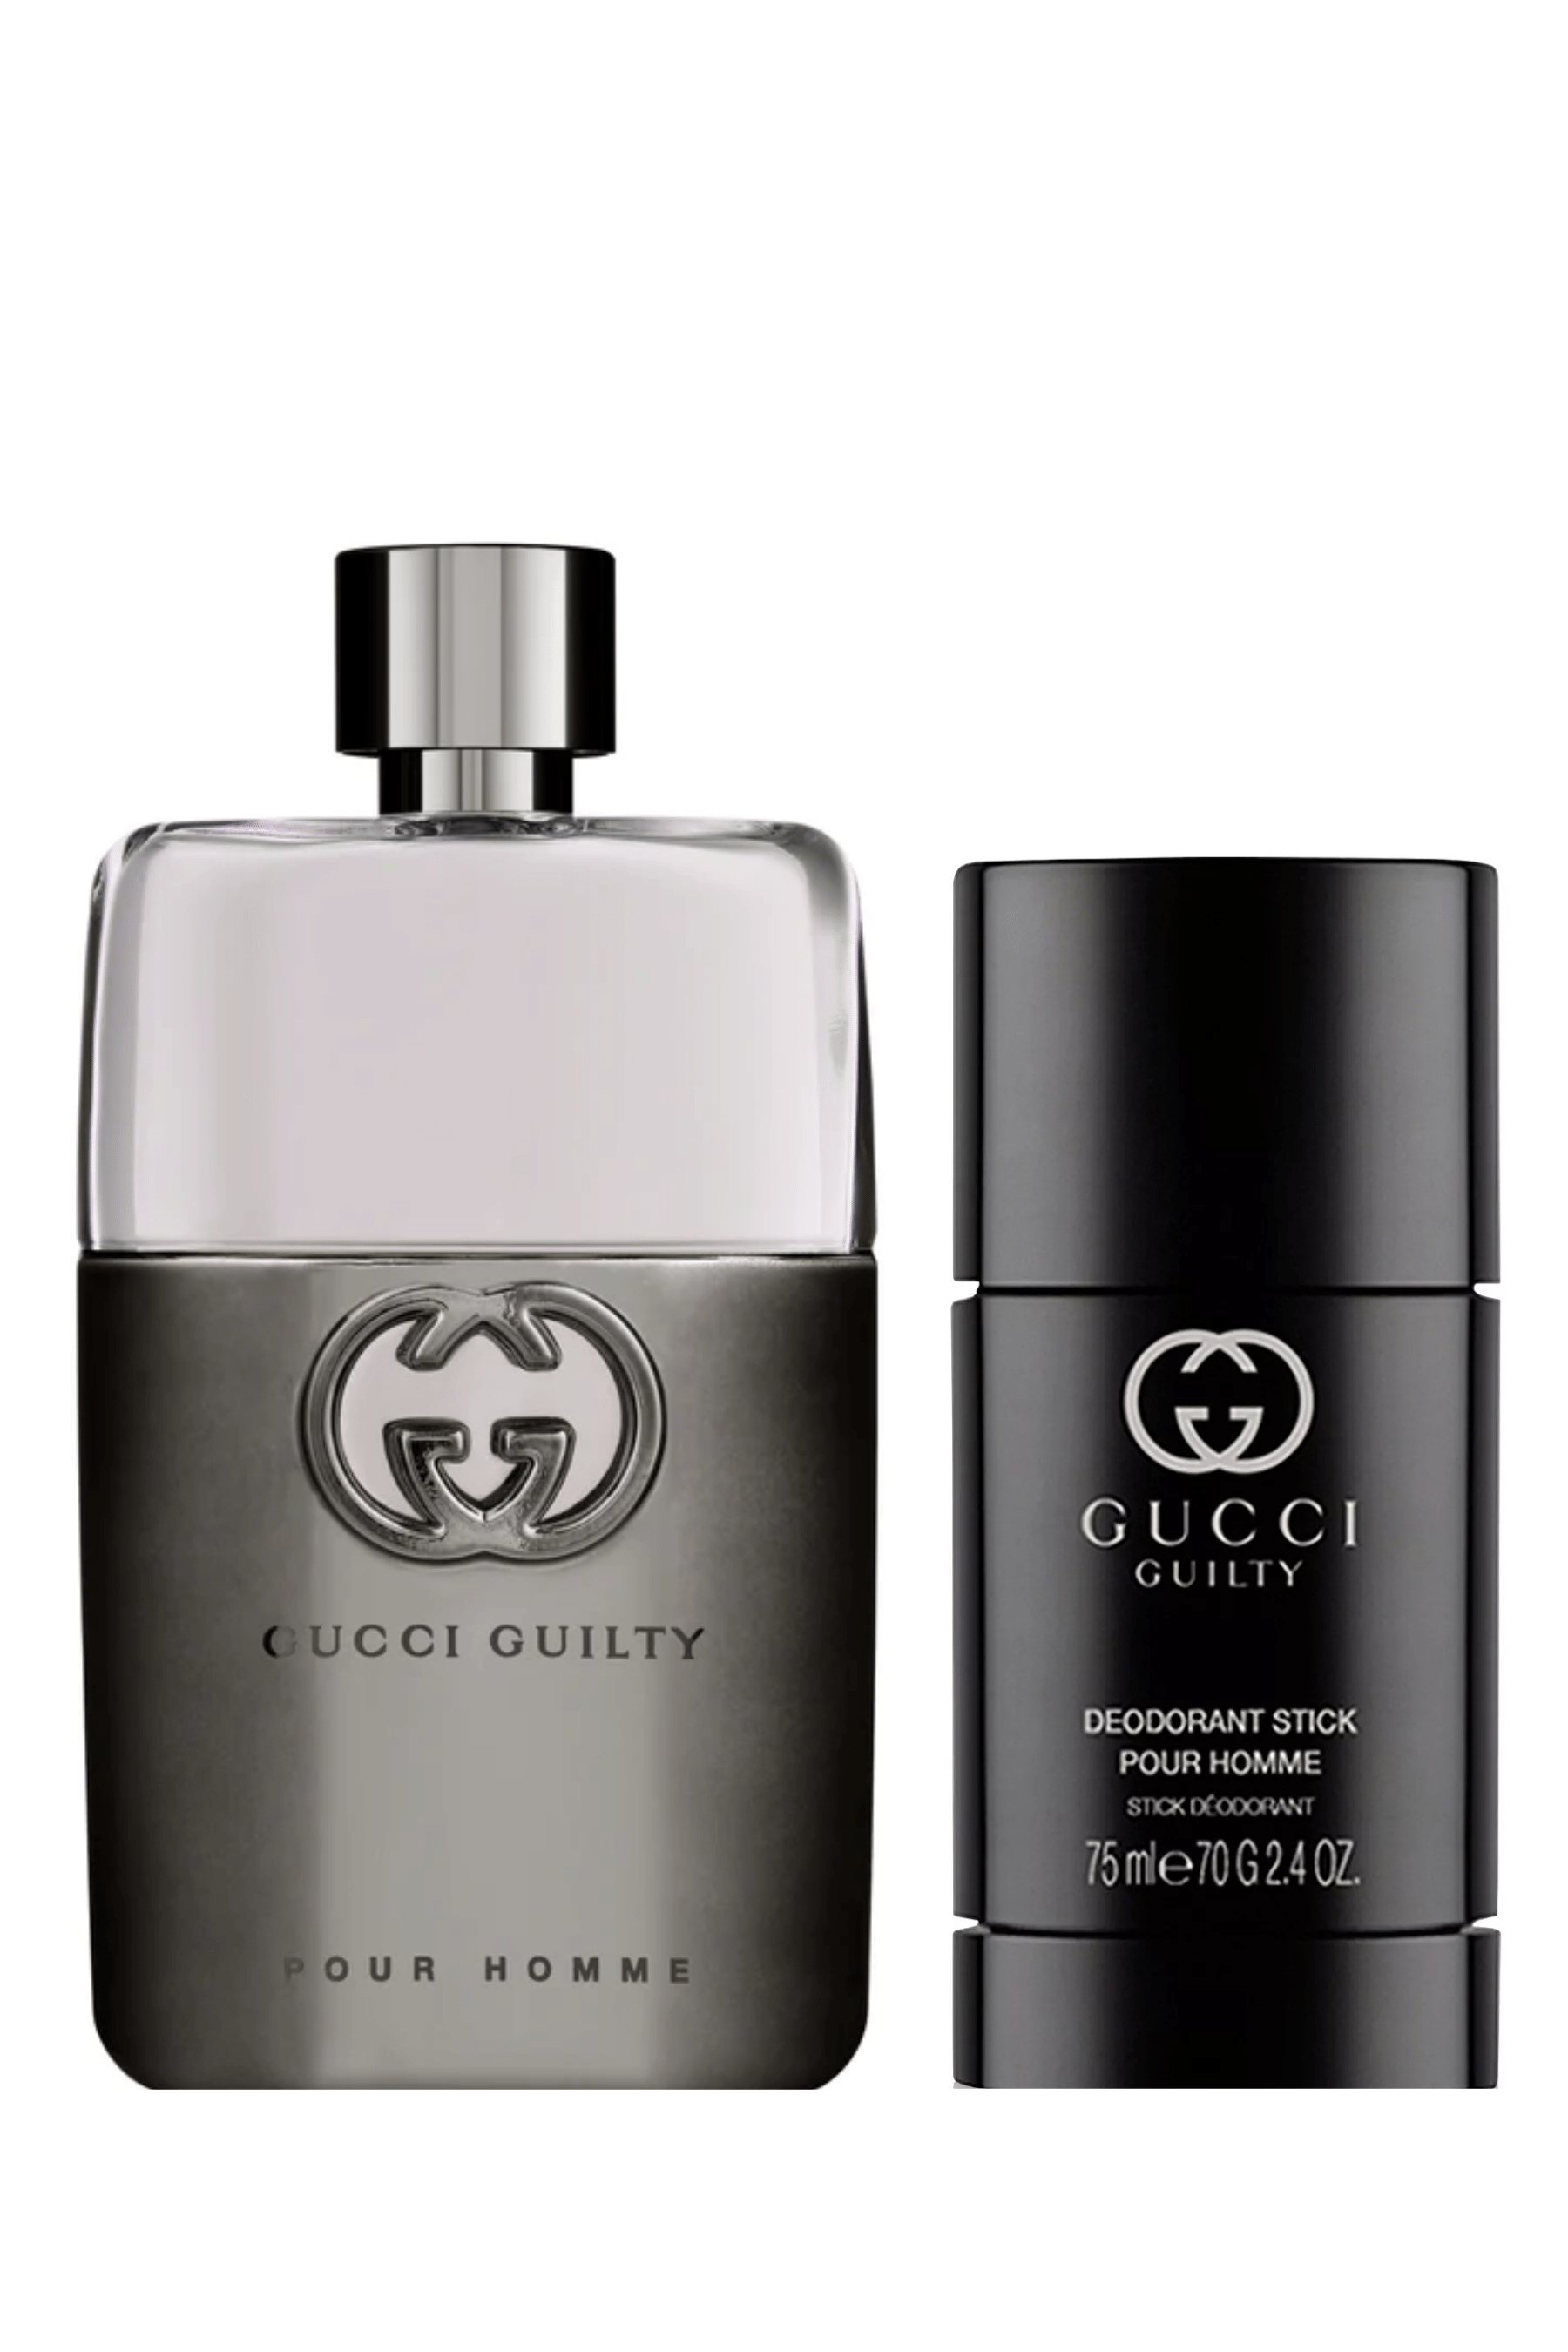 7 Best Gucci Guilty Perfumes For 2022